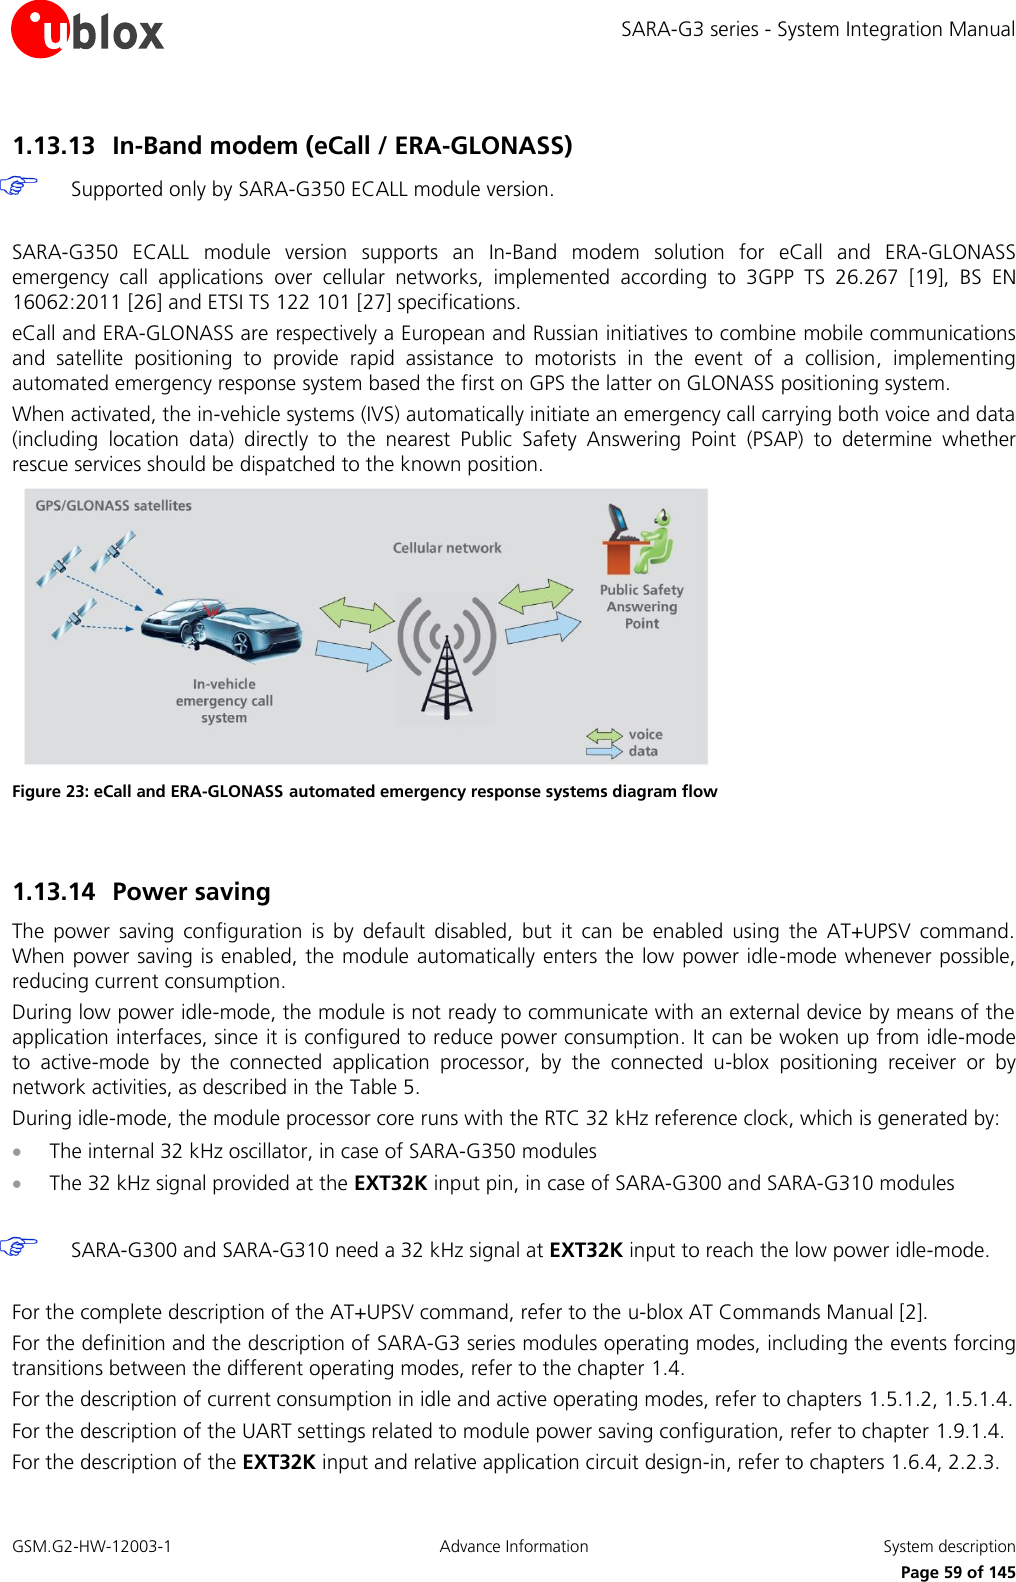 SARA-G3 series - System Integration Manual GSM.G2-HW-12003-1  Advance Information  System description     Page 59 of 145 1.13.13 In-Band modem (eCall / ERA-GLONASS)  Supported only by SARA-G350 ECALL module version.  SARA-G350  ECALL  module  version  supports  an In-Band  modem  solution  for  eCall  and  ERA-GLONASS emergency  call  applications  over  cellular  networks,  implemented  according  to  3GPP  TS  26.267  [19],  BS  EN 16062:2011 [26] and ETSI TS 122 101 [27] specifications. eCall and ERA-GLONASS are respectively a European and Russian initiatives to combine mobile communications and  satellite  positioning  to  provide  rapid  assistance  to  motorists  in  the  event  of  a  collision,  implementing automated emergency response system based the first on GPS the latter on GLONASS positioning system.  When activated, the in-vehicle systems (IVS) automatically initiate an emergency call carrying both voice and data (including  location  data)  directly  to  the  nearest  Public  Safety  Answering  Point  (PSAP)  to  determine  whether rescue services should be dispatched to the known position.  Figure 23: eCall and ERA-GLONASS automated emergency response systems diagram flow  1.13.14 Power saving  The  power  saving  configuration  is  by  default  disabled,  but  it  can  be  enabled  using  the  AT+UPSV  command. When power saving is enabled, the module automatically enters the low power idle-mode whenever possible, reducing current consumption. During low power idle-mode, the module is not ready to communicate with an external device by means of the application interfaces, since it is configured to reduce power consumption. It can be woken up from idle-mode to  active-mode  by  the  connected  application  processor,  by  the  connected  u-blox  positioning  receiver  or  by network activities, as described in the Table 5. During idle-mode, the module processor core runs with the RTC 32 kHz reference clock, which is generated by:  The internal 32 kHz oscillator, in case of SARA-G350 modules  The 32 kHz signal provided at the EXT32K input pin, in case of SARA-G300 and SARA-G310 modules   SARA-G300 and SARA-G310 need a 32 kHz signal at EXT32K input to reach the low power idle-mode.  For the complete description of the AT+UPSV command, refer to the u-blox AT Commands Manual [2]. For the definition and the description of SARA-G3 series modules operating modes, including the events forcing transitions between the different operating modes, refer to the chapter 1.4. For the description of current consumption in idle and active operating modes, refer to chapters 1.5.1.2, 1.5.1.4. For the description of the UART settings related to module power saving configuration, refer to chapter 1.9.1.4. For the description of the EXT32K input and relative application circuit design-in, refer to chapters 1.6.4, 2.2.3. 